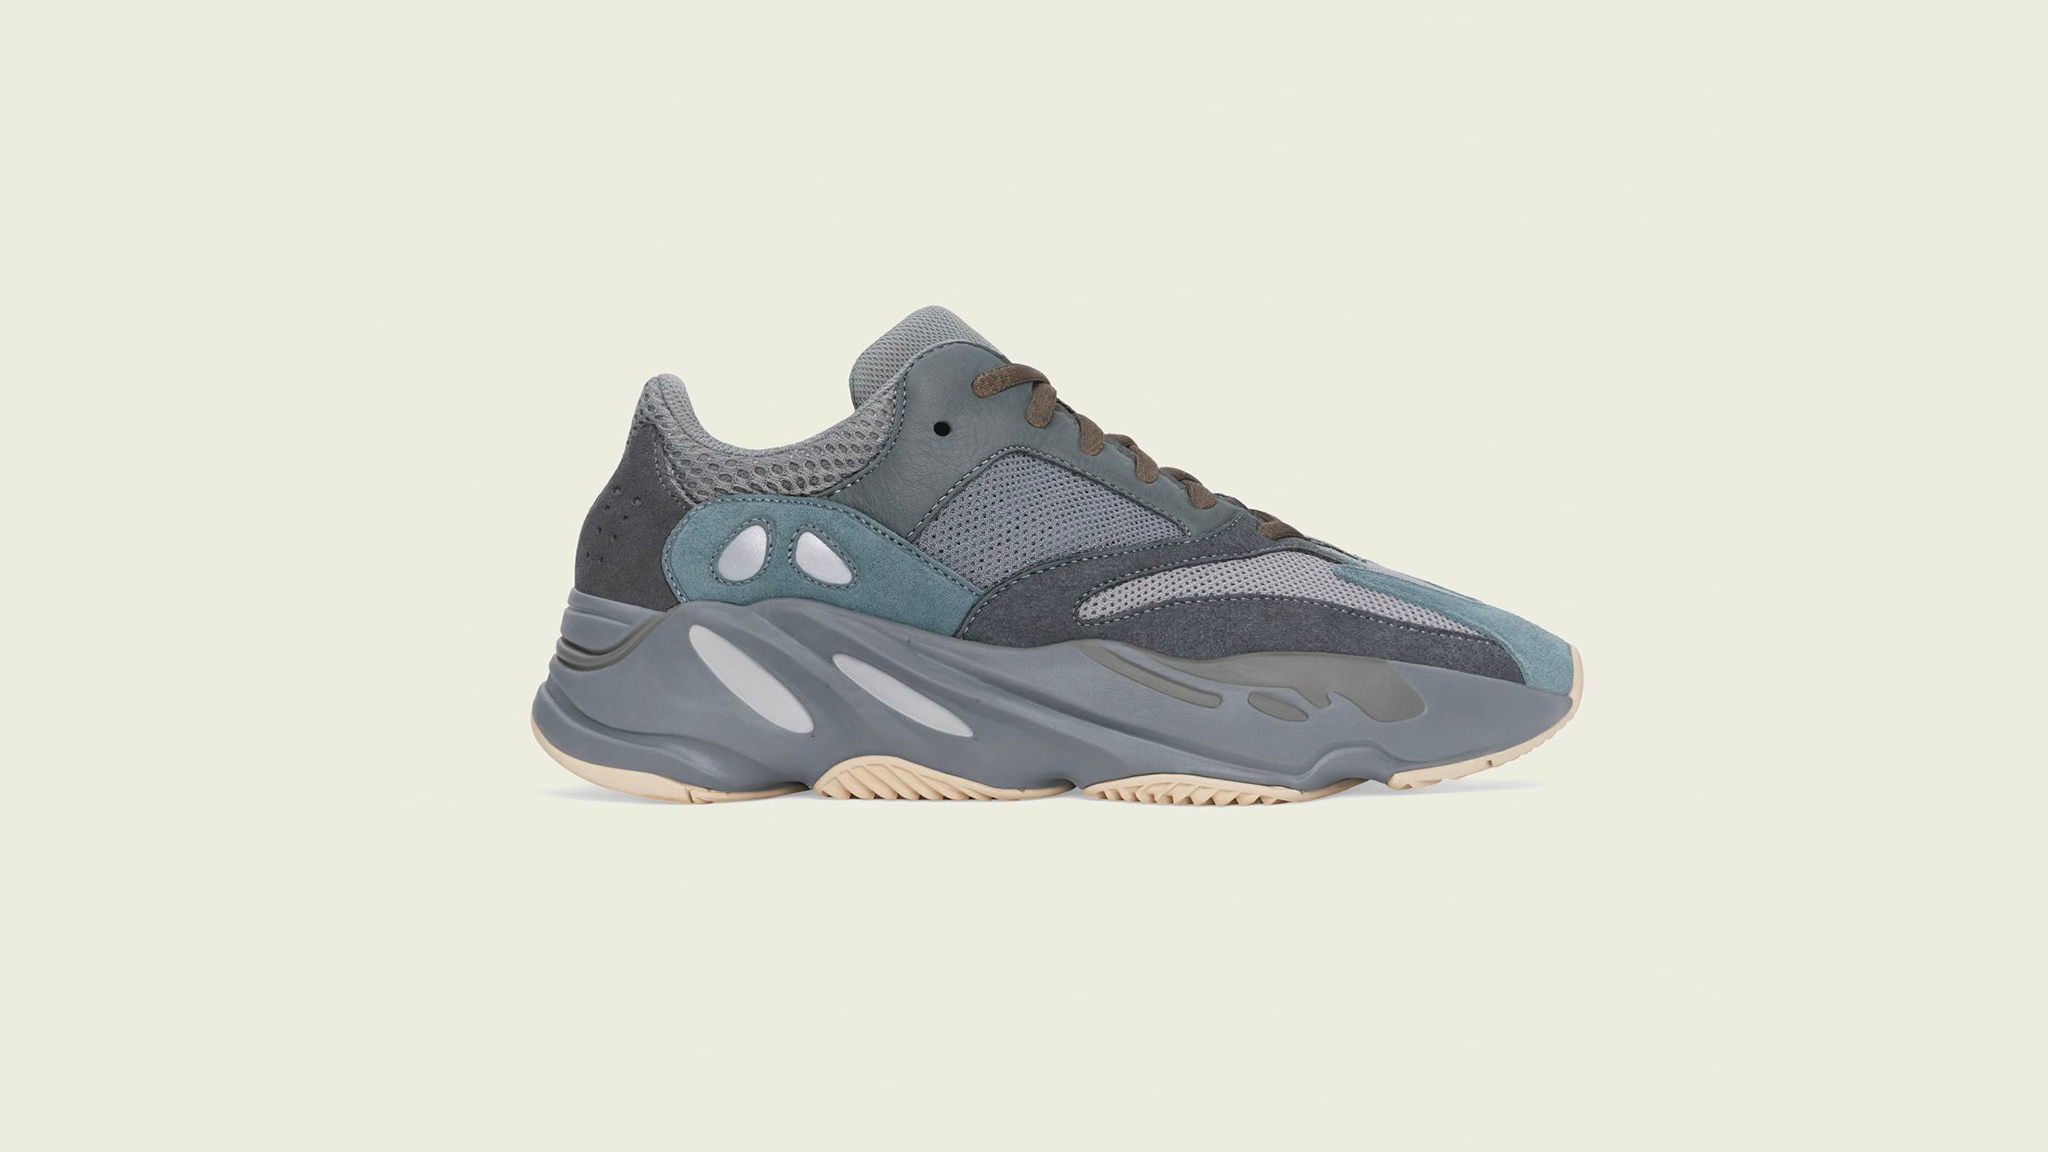 The Adidas Yeezy Boost 700 “Teal Blue” Releases This Month